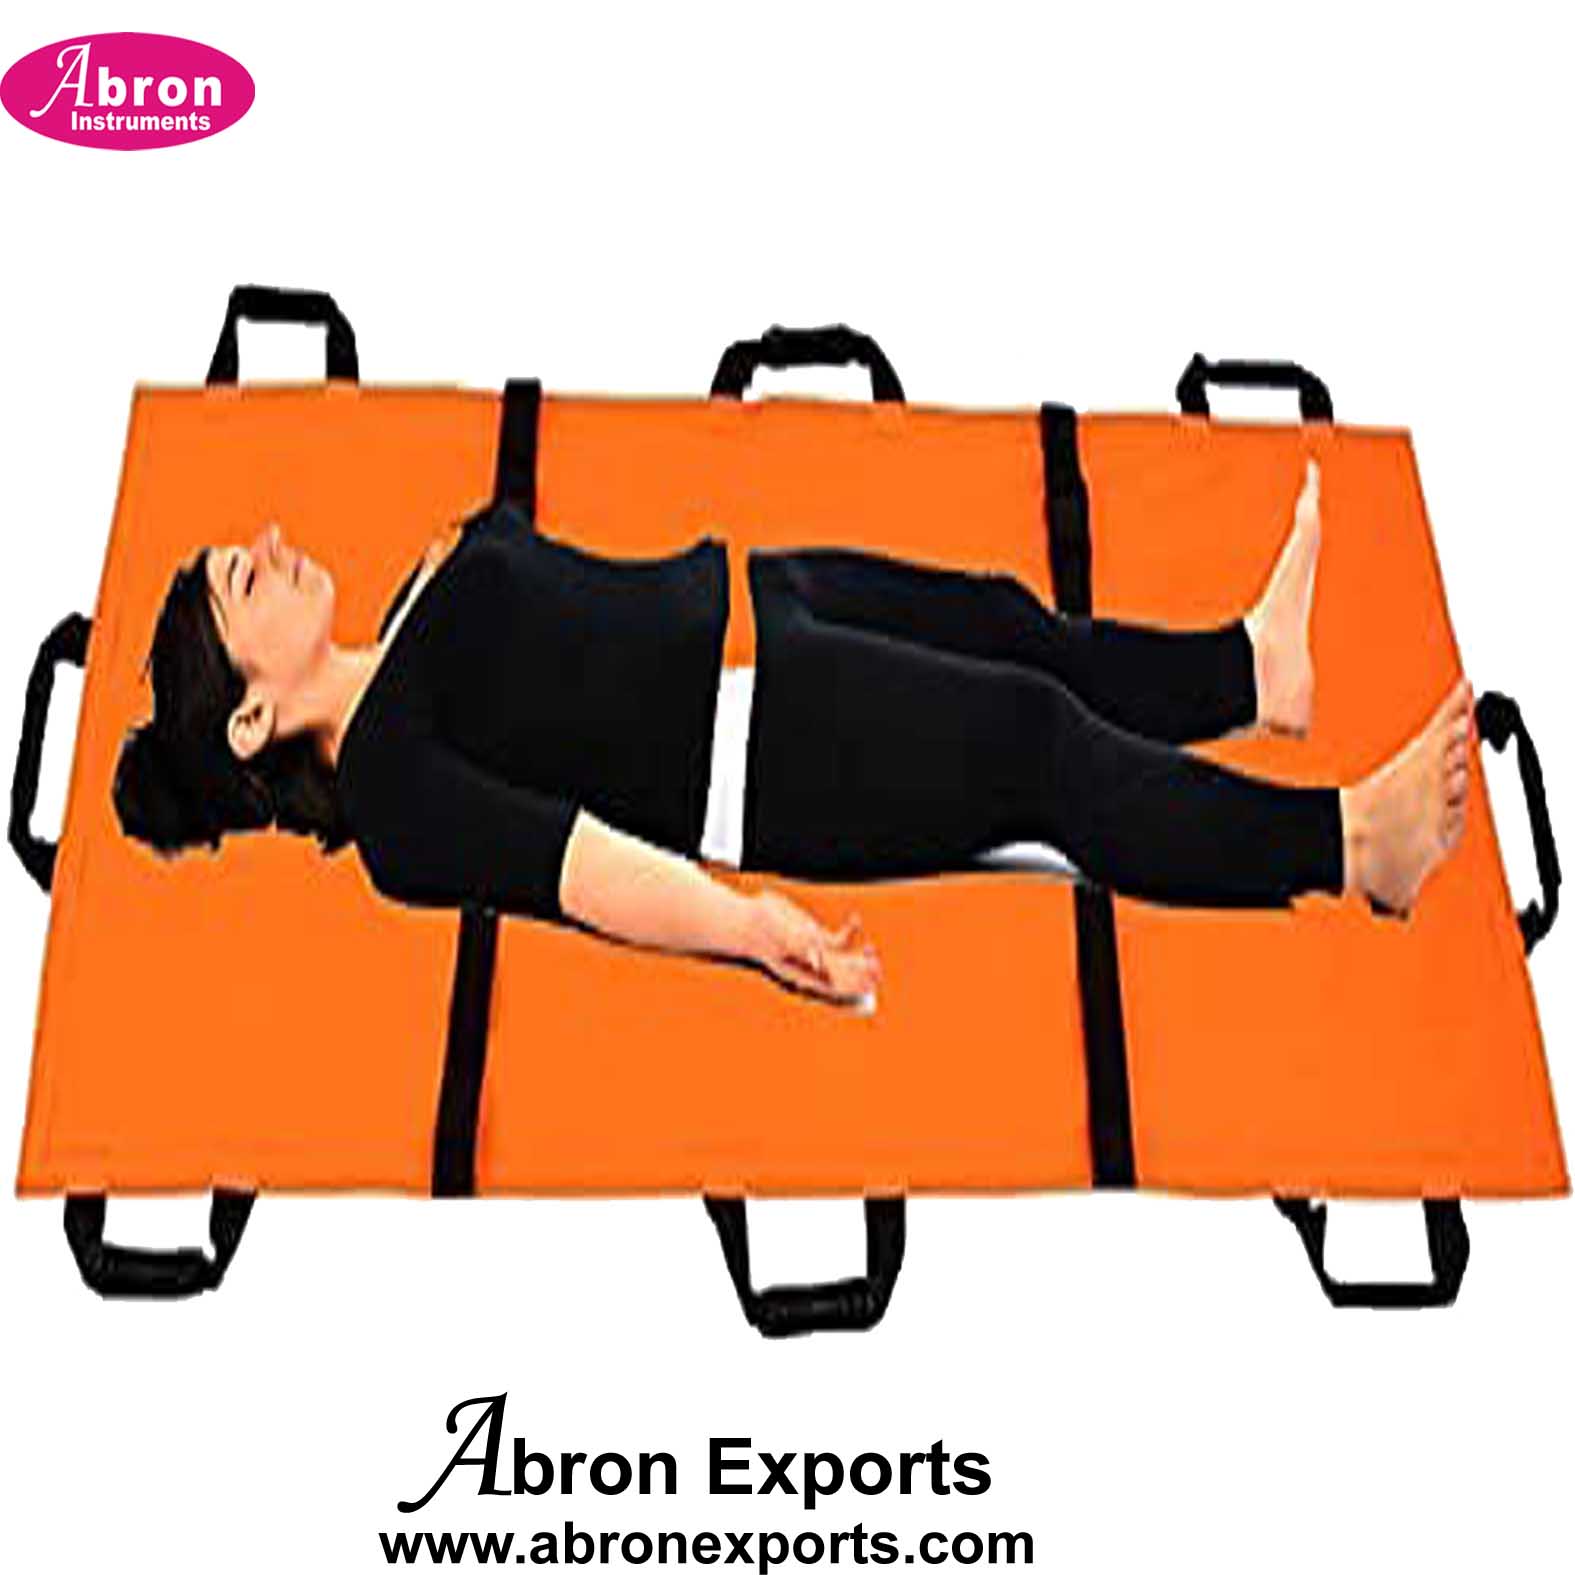 Emergency stretcher double canves folding with bag abron ABM-2260-SFC